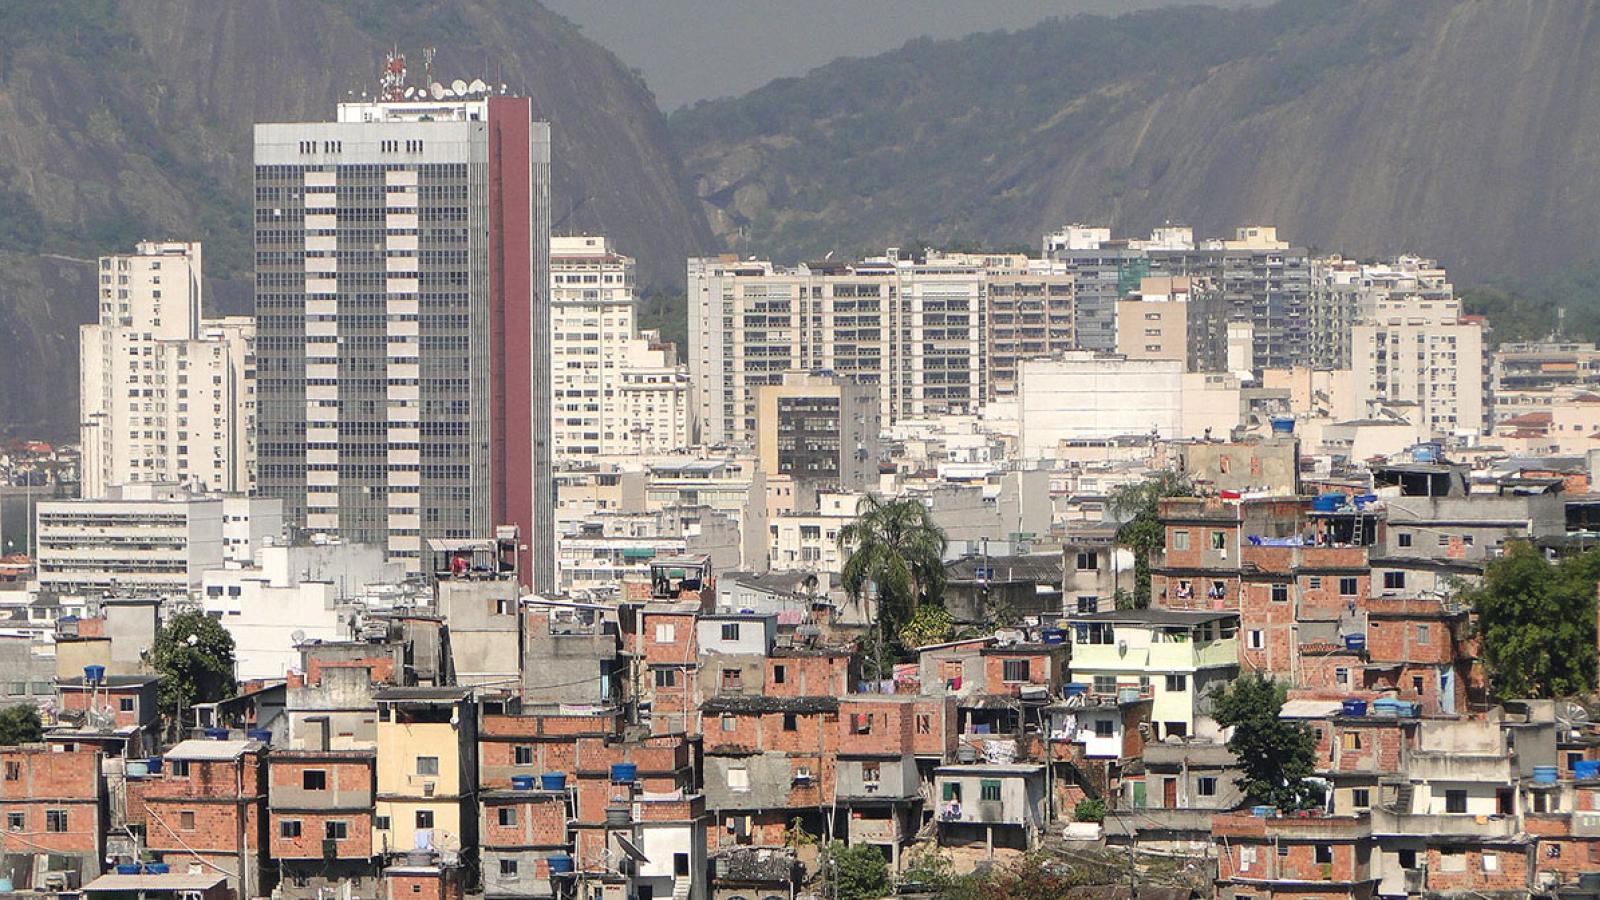 View showing slums in front of skyscrapers